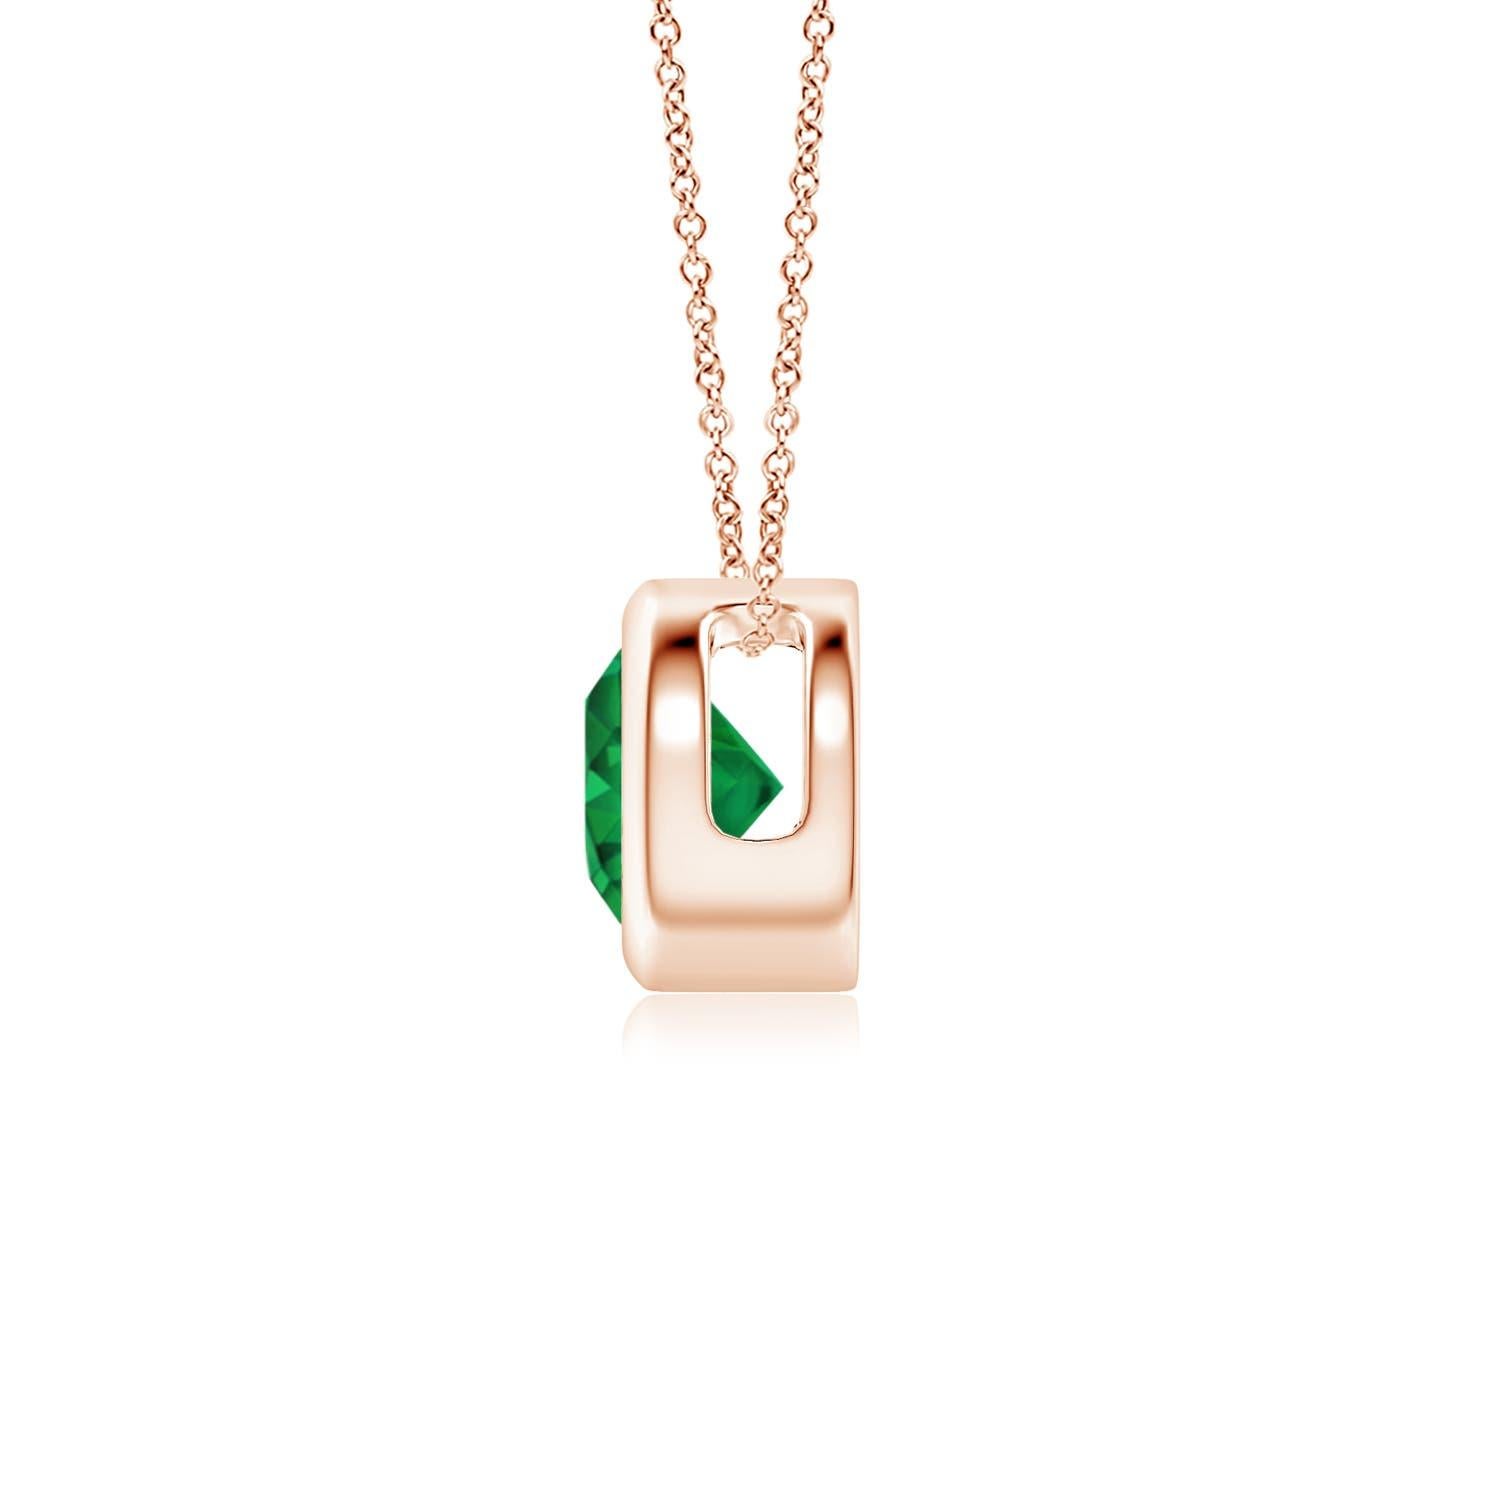 This classic solitaire emerald pendant's beautiful design makes the center stone appear like it's floating on the chain. The lush green emerald is secured in a bezel setting. Crafted in 14k rose gold, this round emerald pendant is simple yet